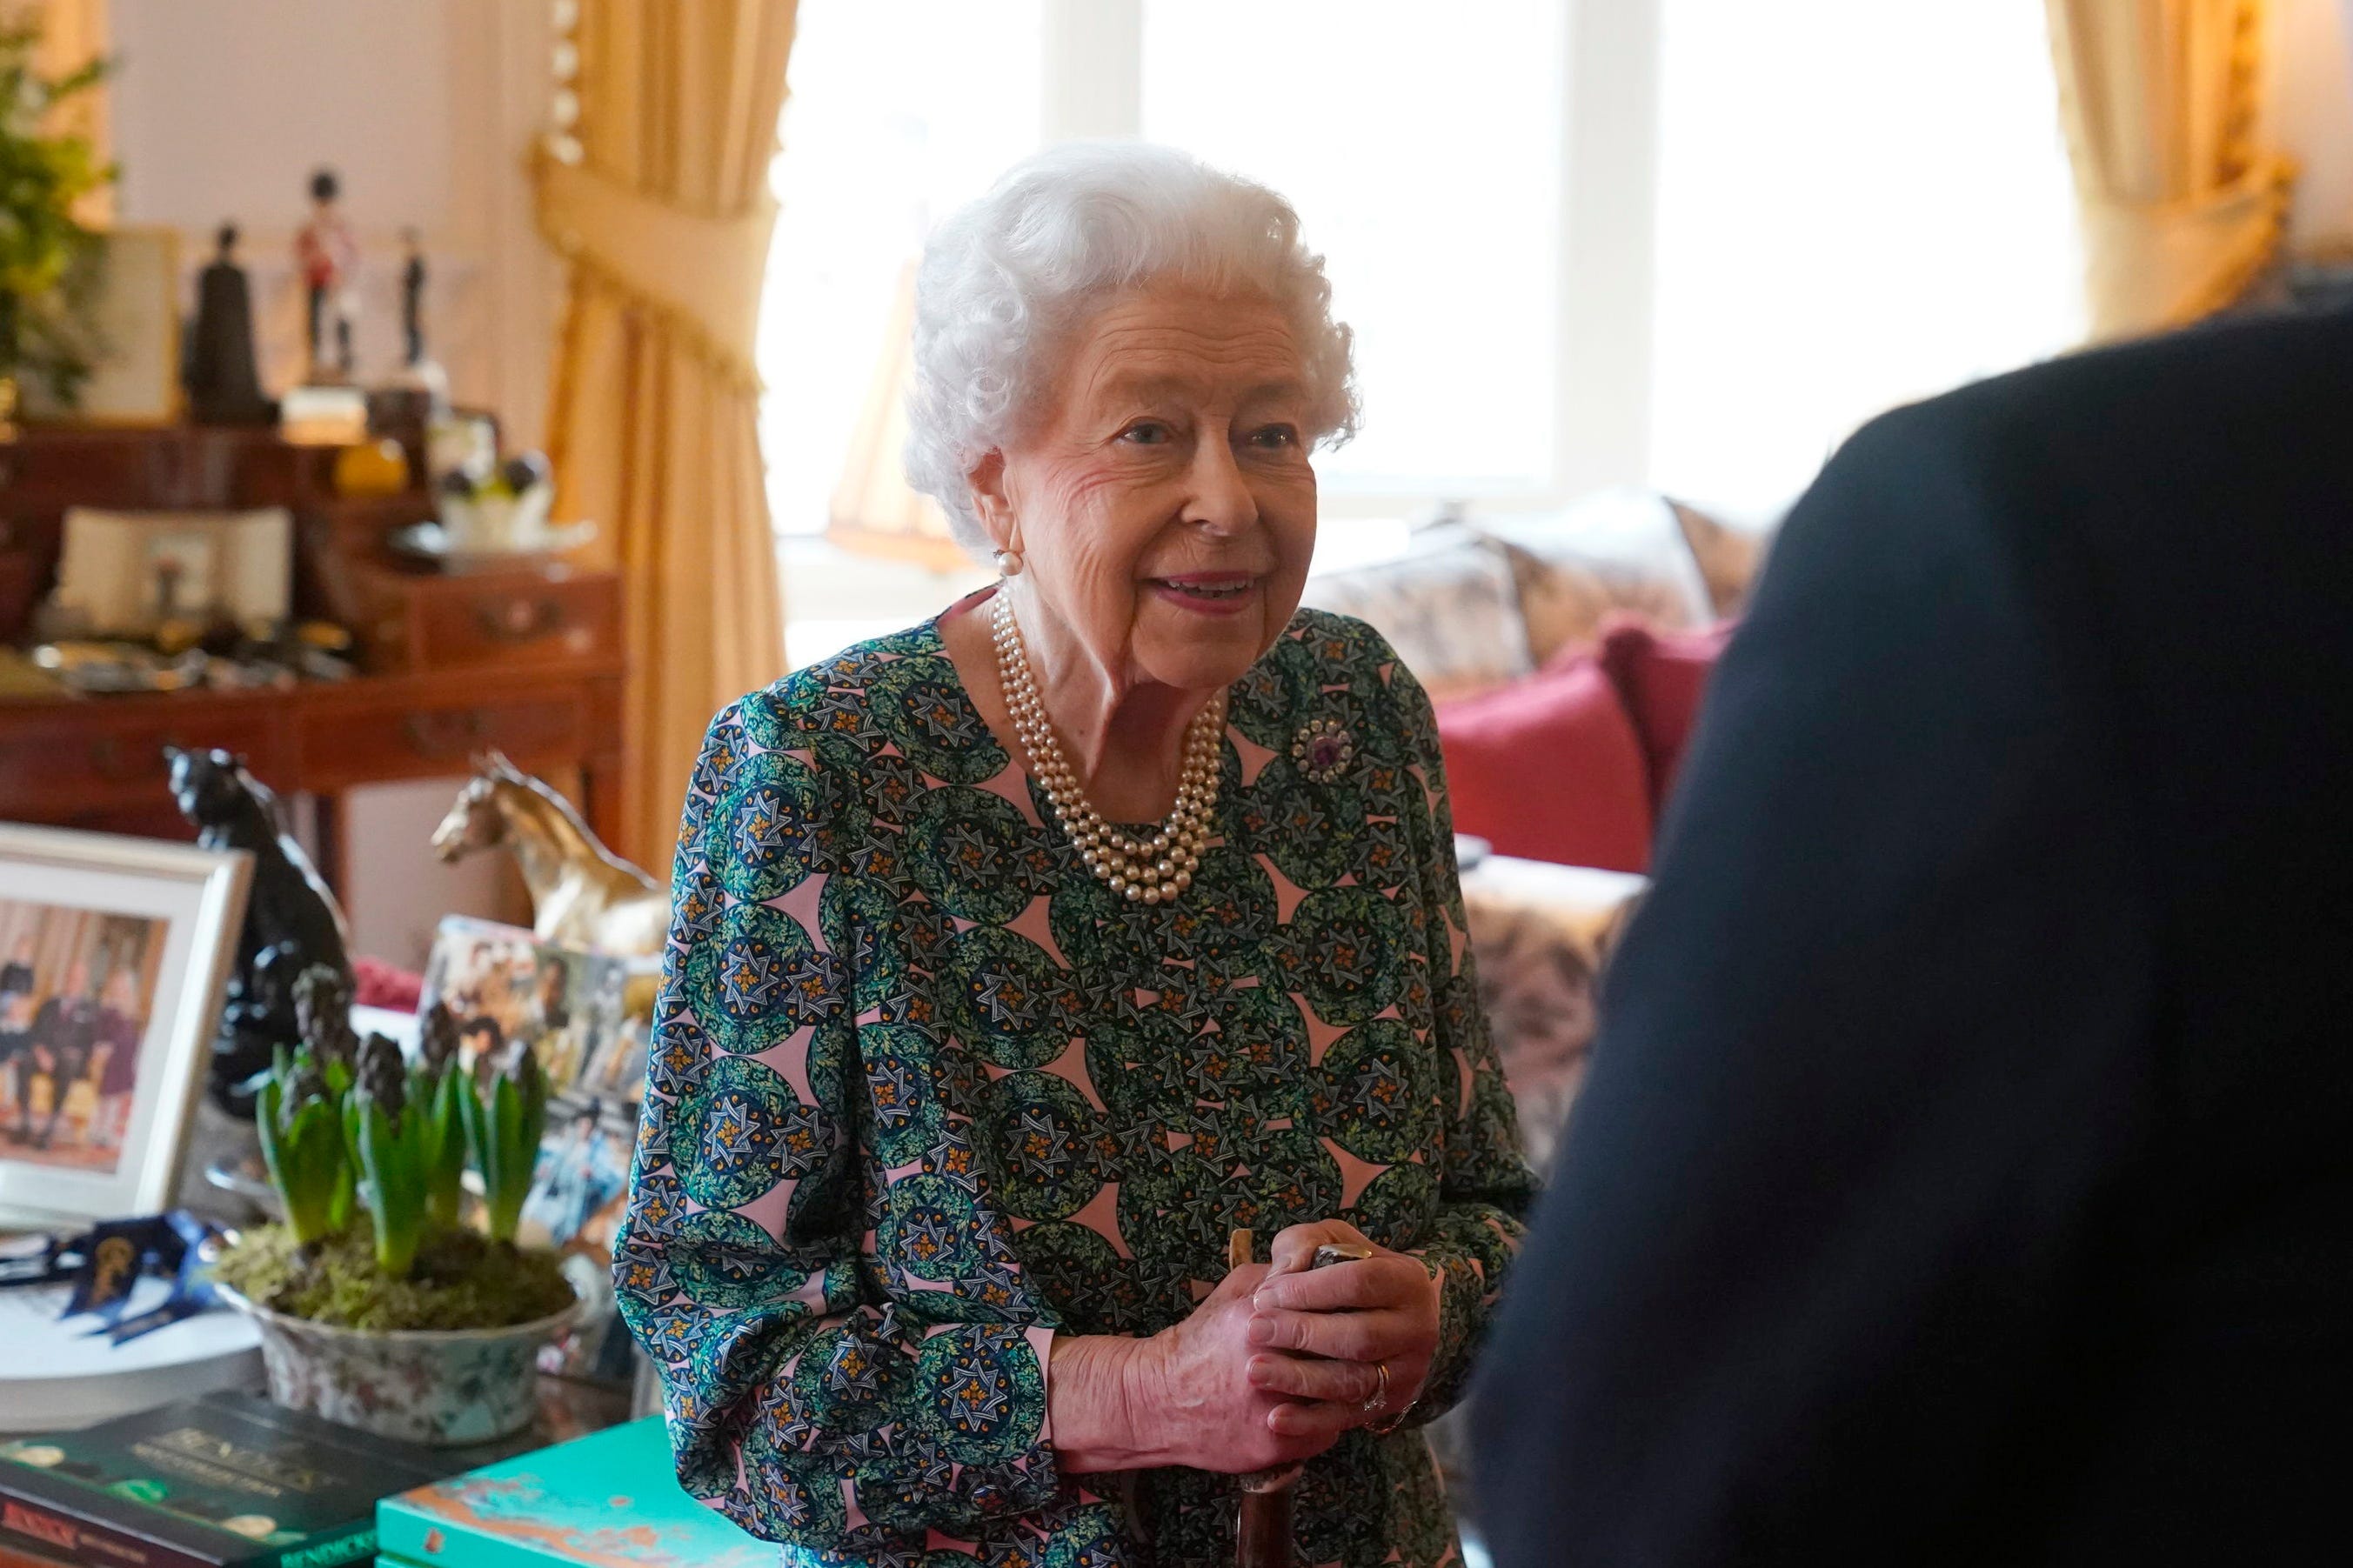 Queen Elizabeth II speaks during an audience at Windsor Castle where she met the incoming and outgoing Defence Service Secretaries, Wednesday Feb. 16, 2022. Buckingham Palace said Sunday, Feb. 20, 2022 that Queen Elizabeth II tested positive for COVID-19, has mild symptoms and will continue with duties.